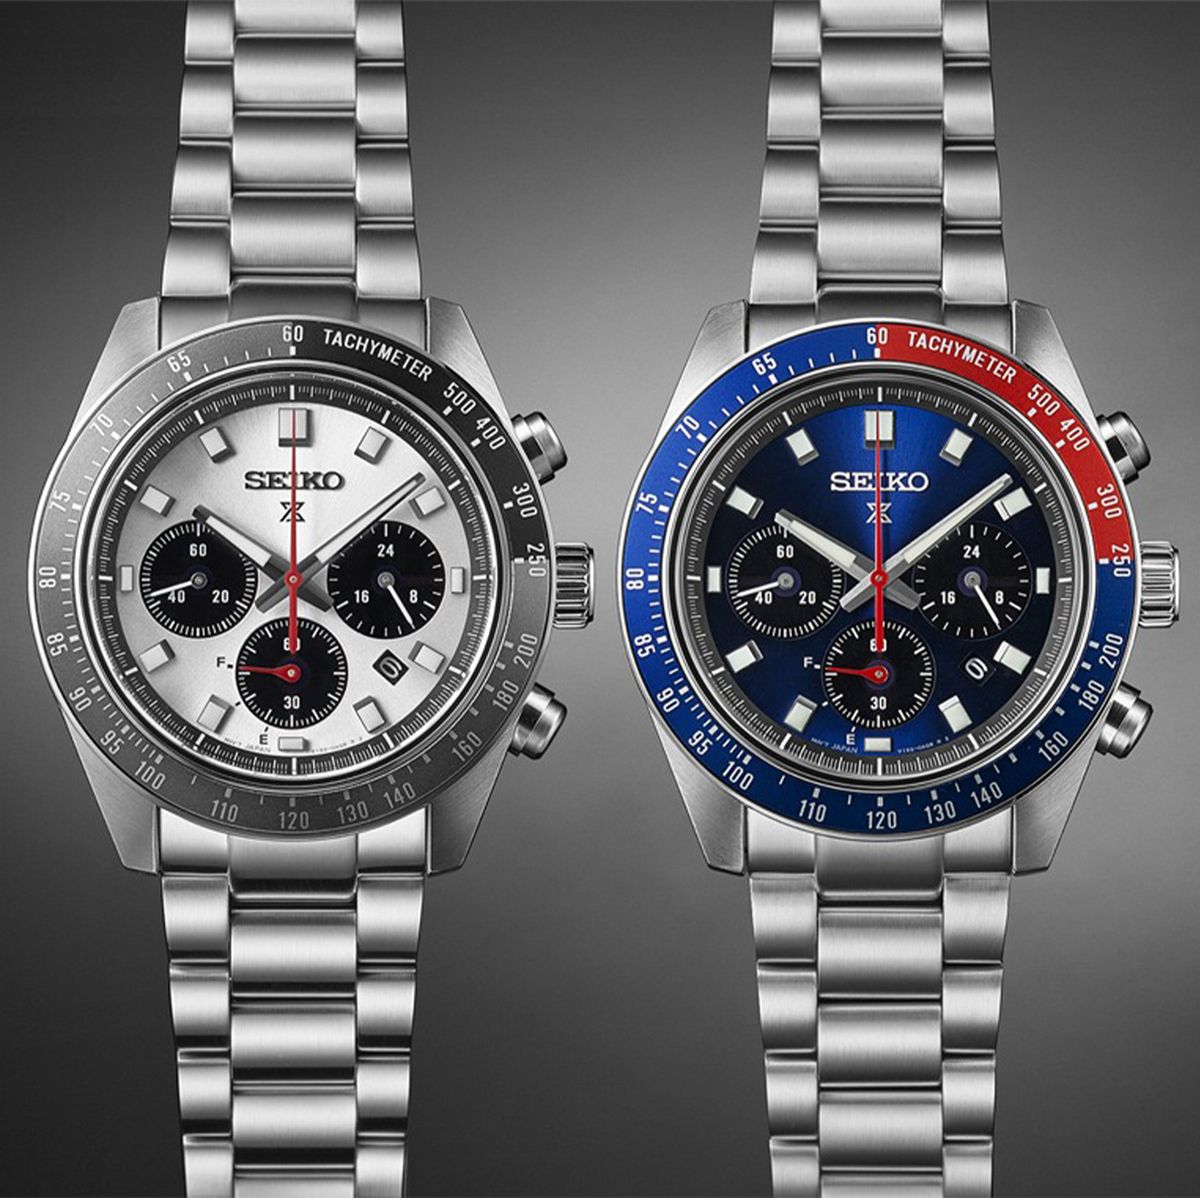 Seiko's New Speedtimer Chronographs Are Sure to Excite Watch Fans